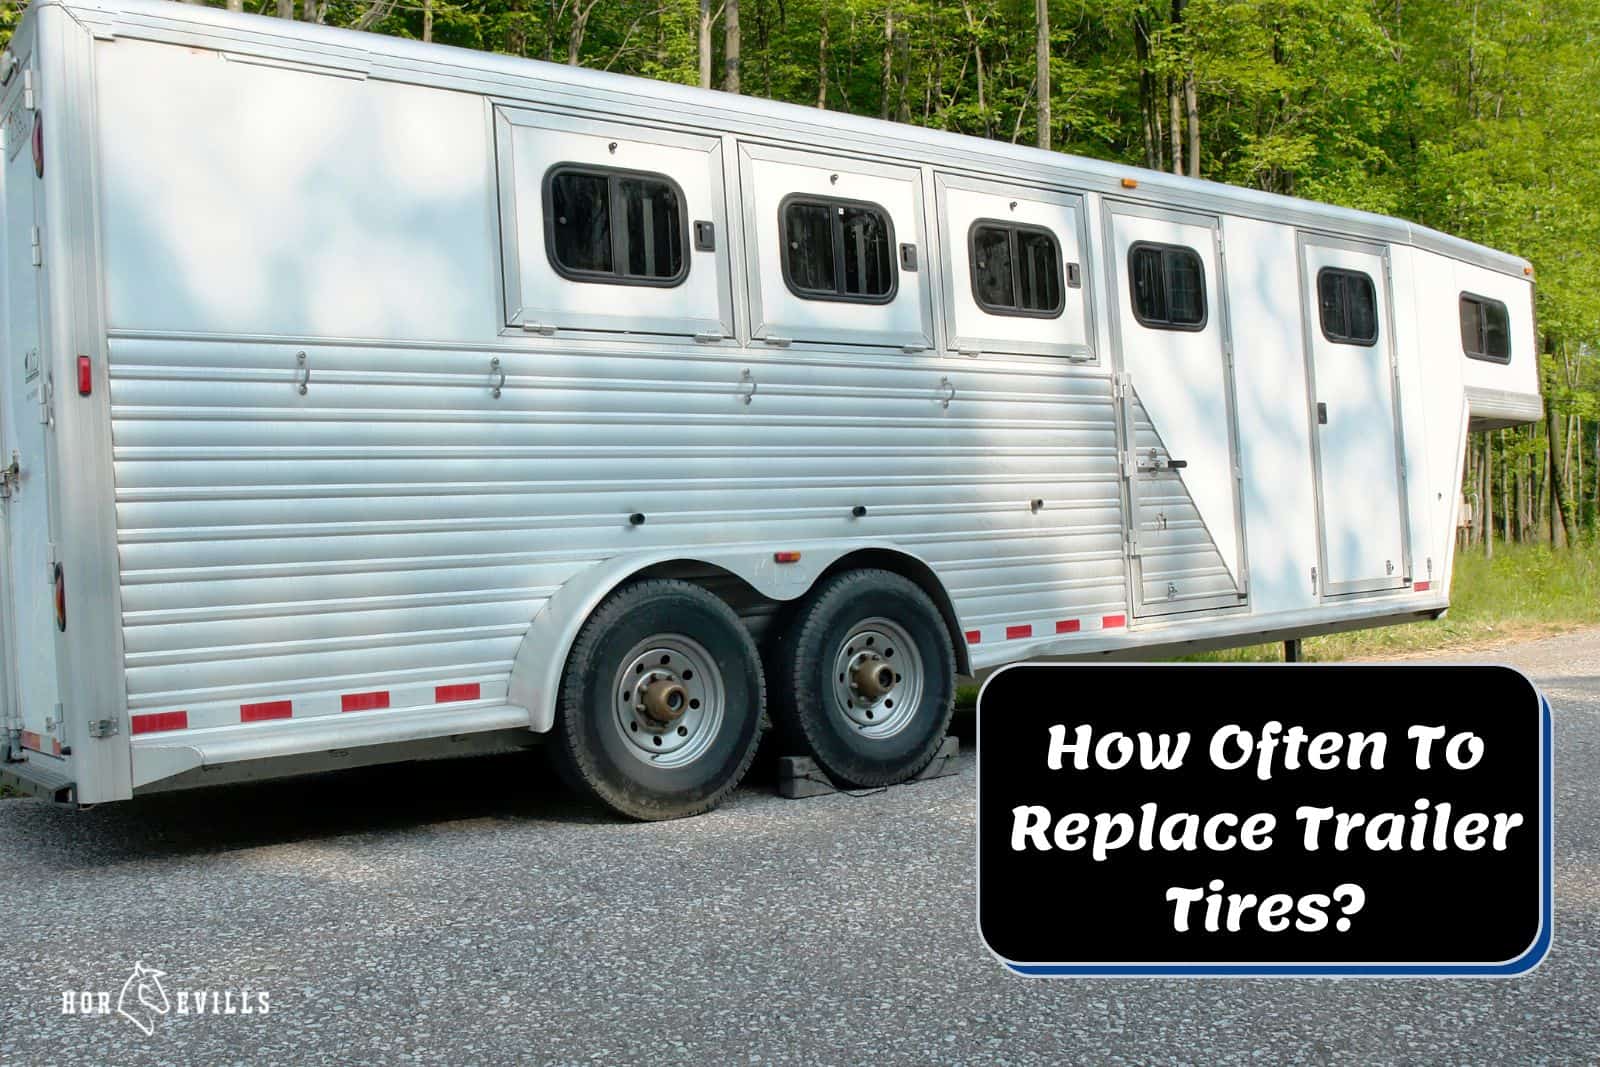 trailer with good quality tires, how often to replace trailer tires